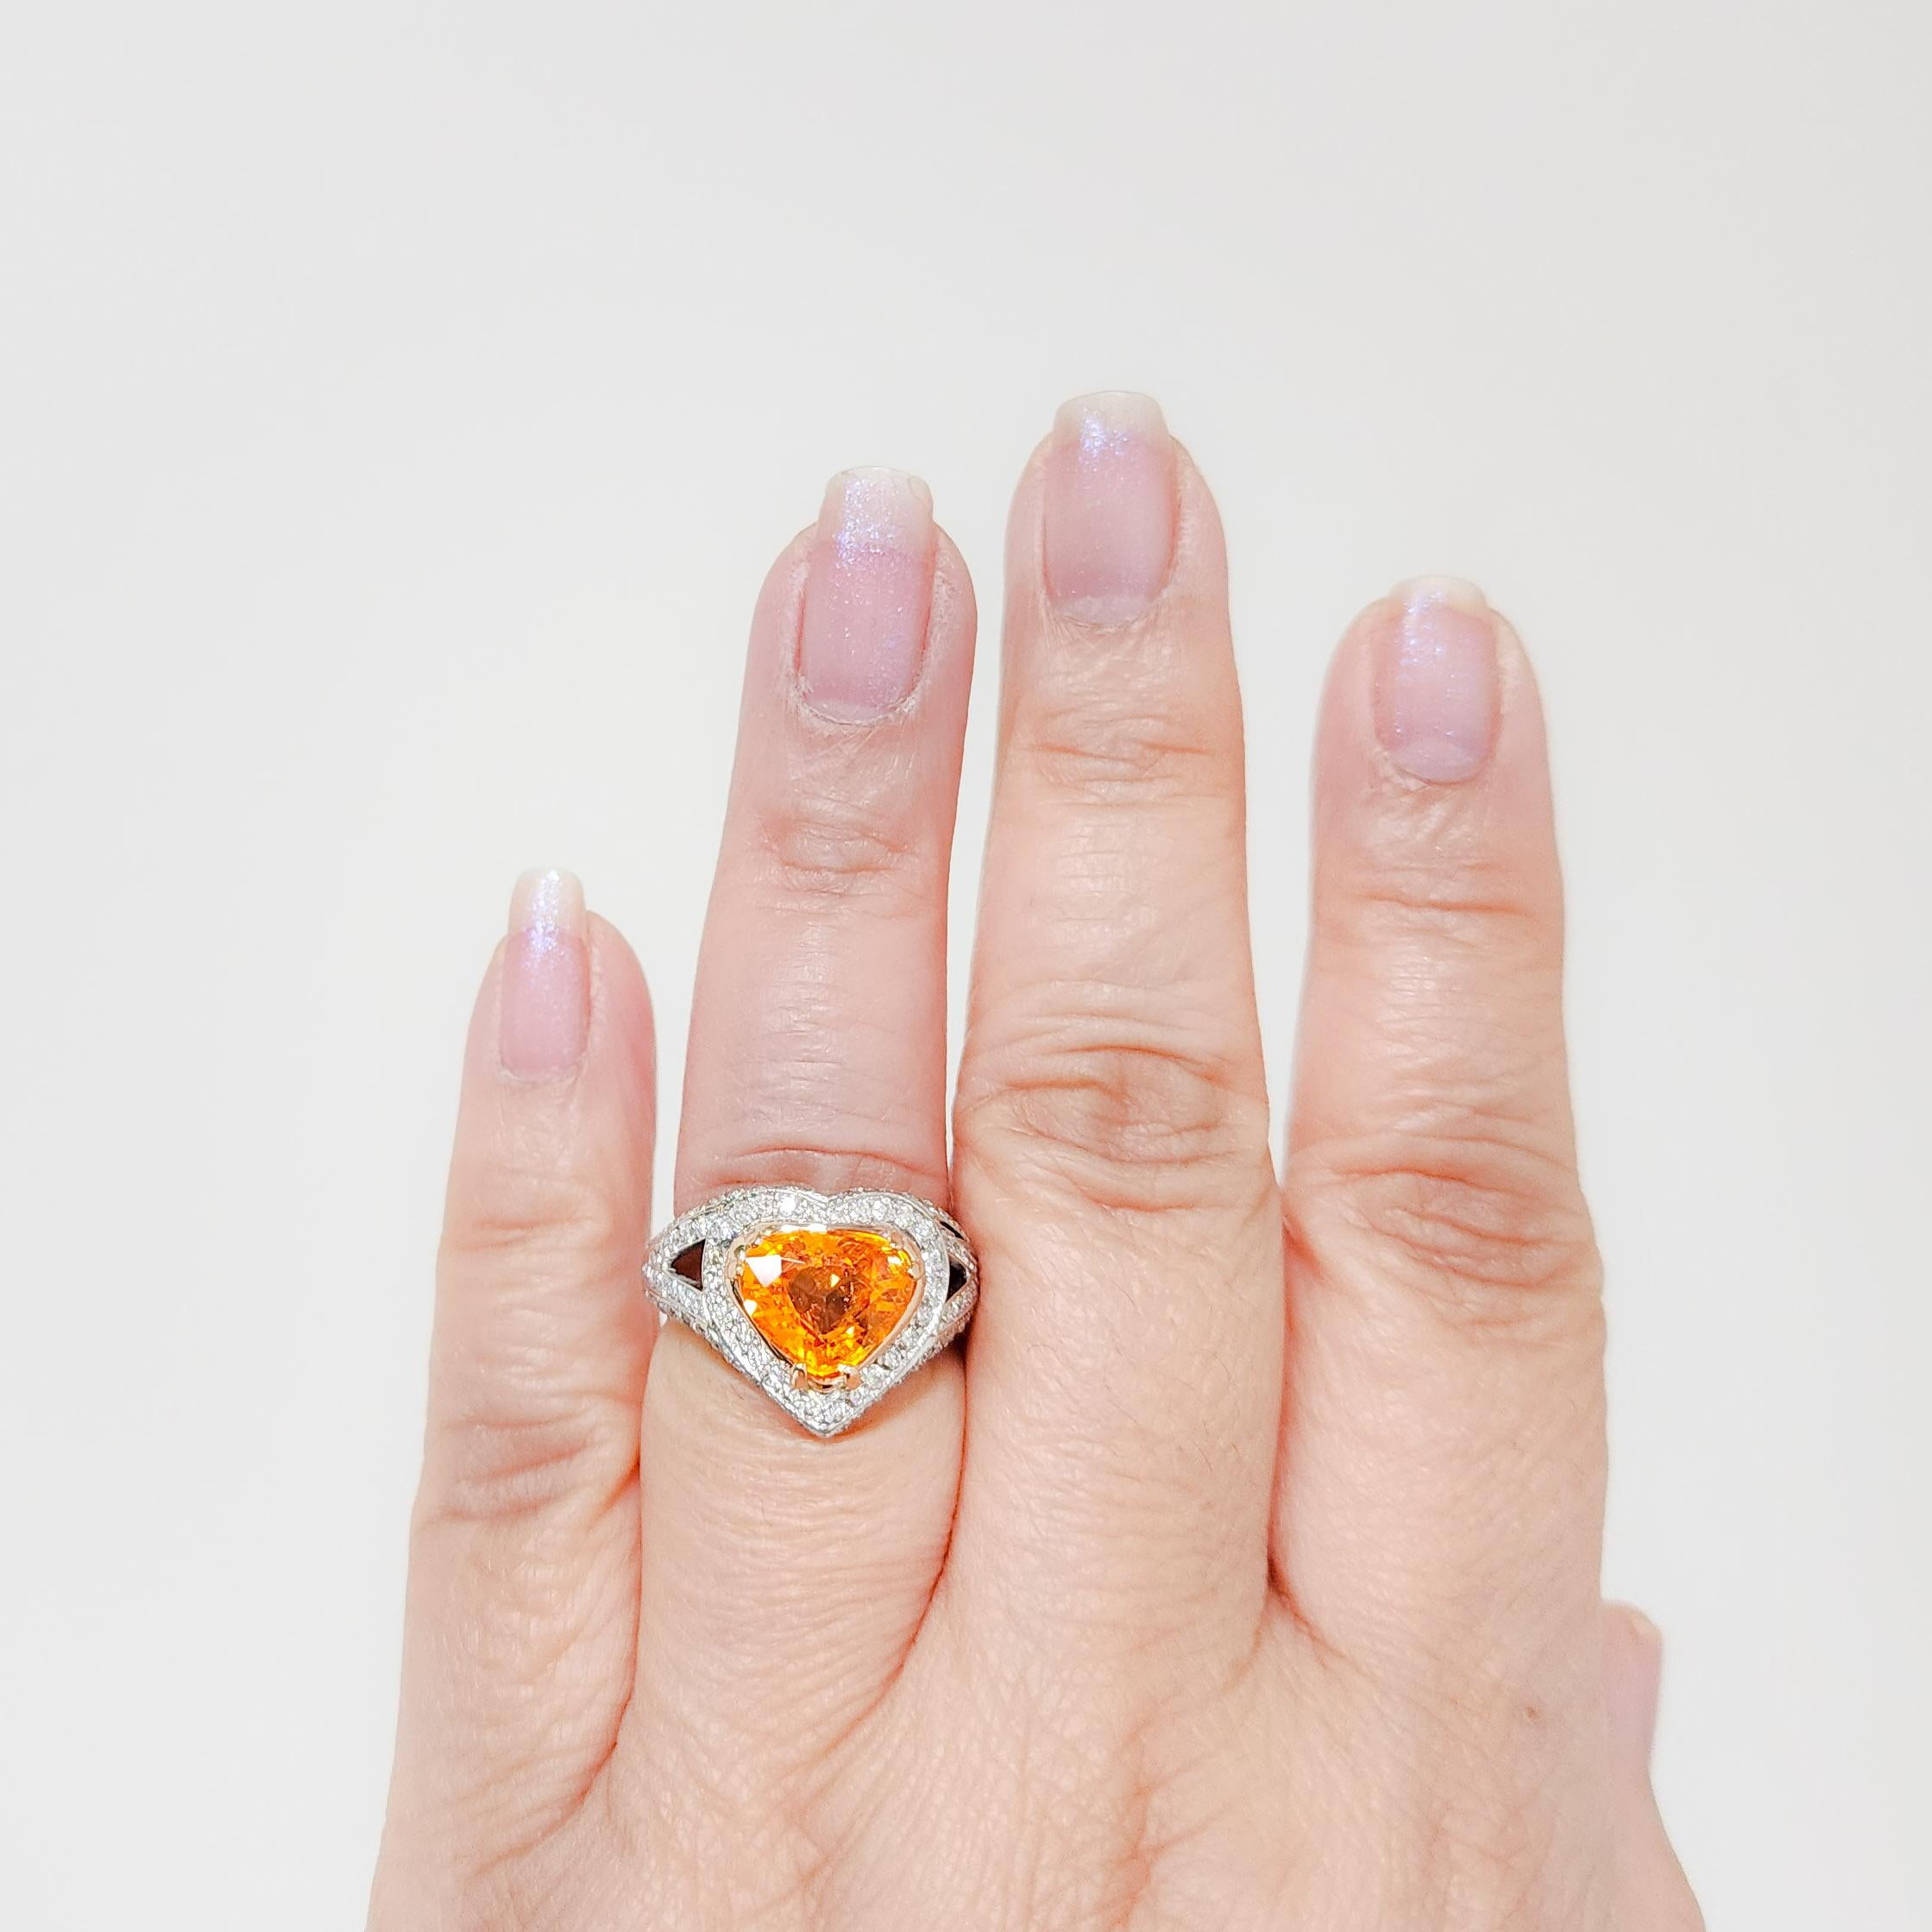 Beautiful 3.95 ct. Mandarin garnet pear shape with 2.00 ct. good quality white diamond rounds.  Handmade in platinum and 18k yellow gold.  Ring size 6.75.